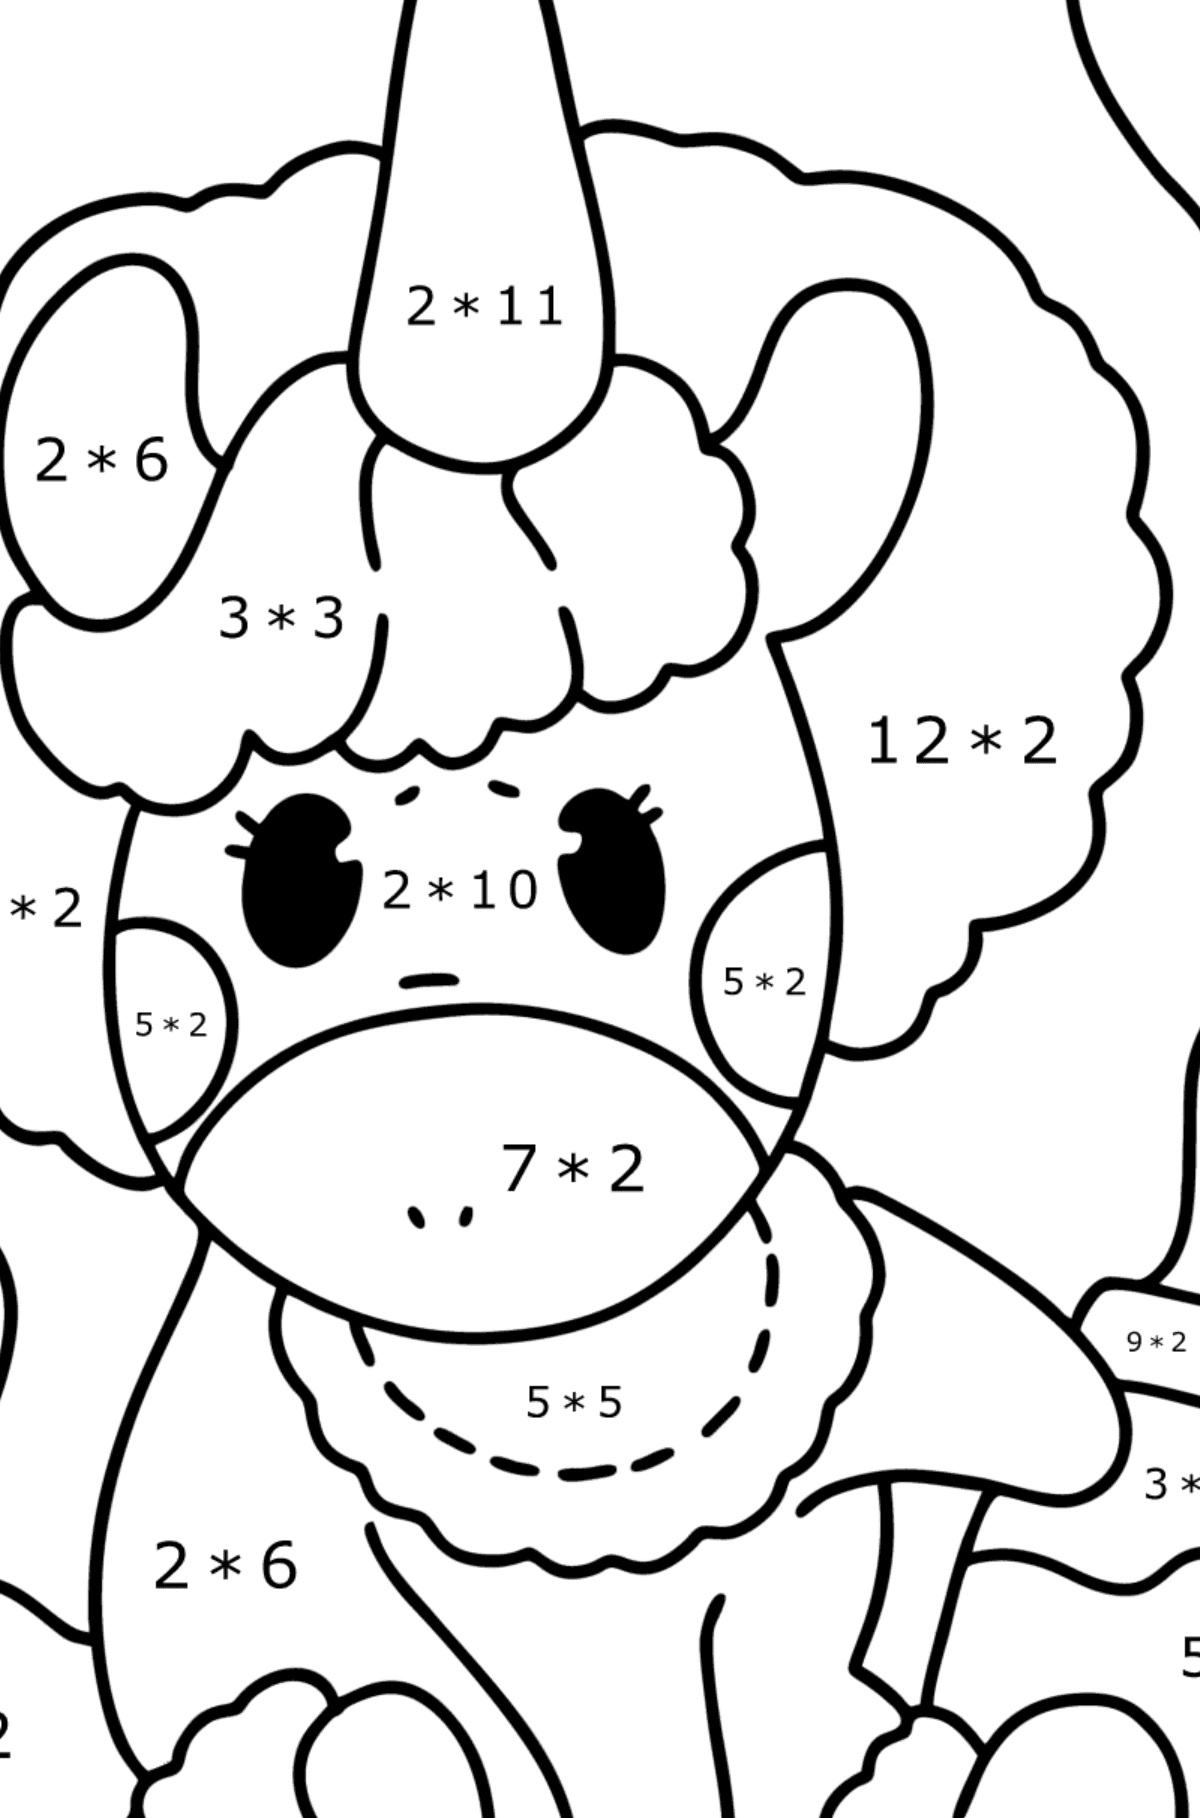 Unicorn kid coloring page - Math Coloring - Multiplication for Kids